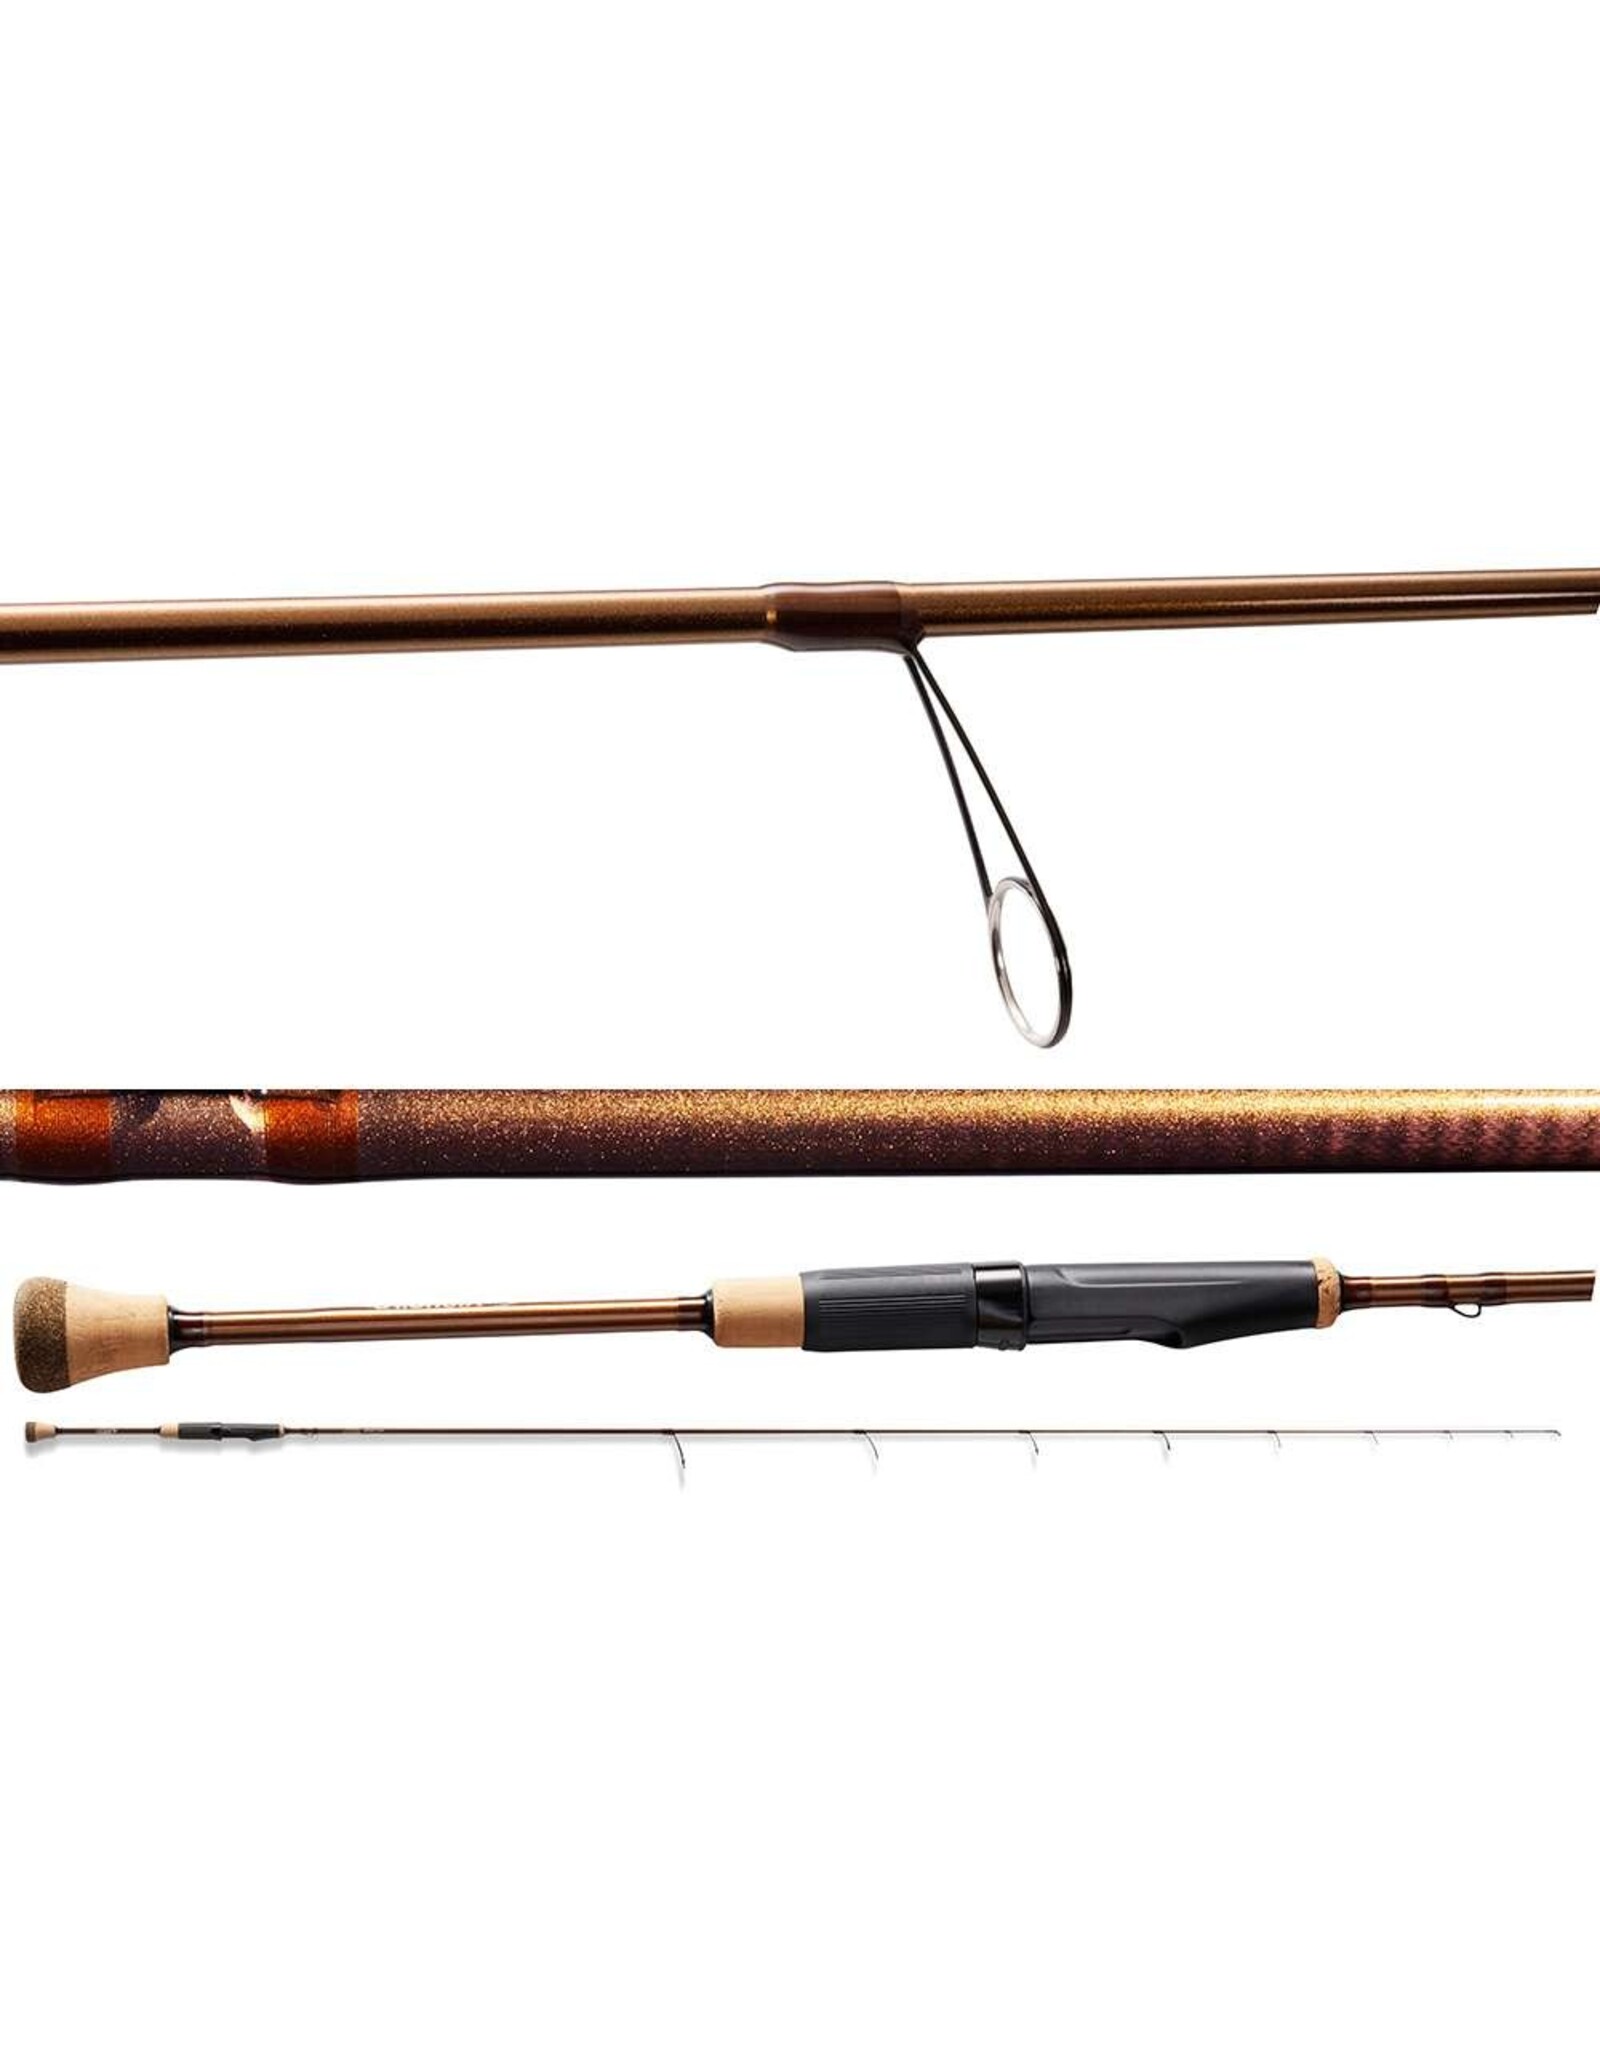 St Croix St. Croix PNS70LXF Panfish Series Spinning Rod by St. Croix 7'0" Light Extra Fast